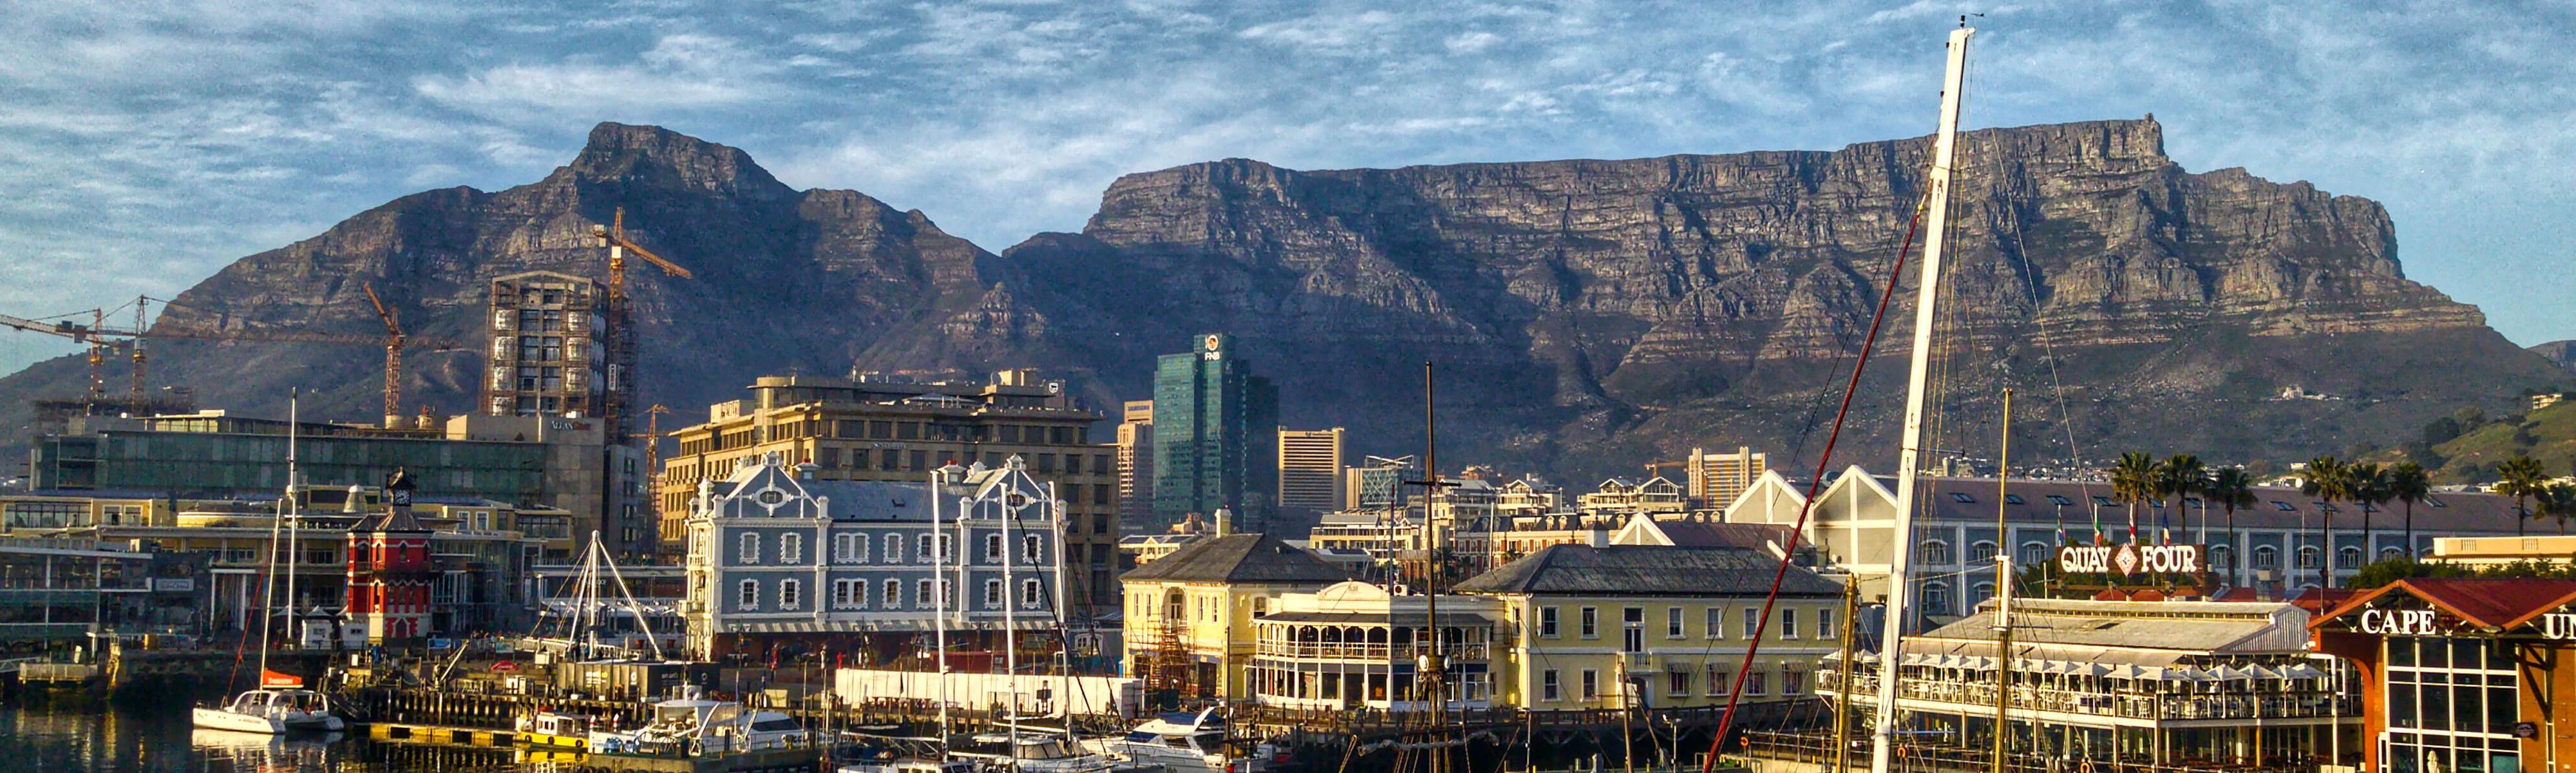 mountains and docks in cape town south africa